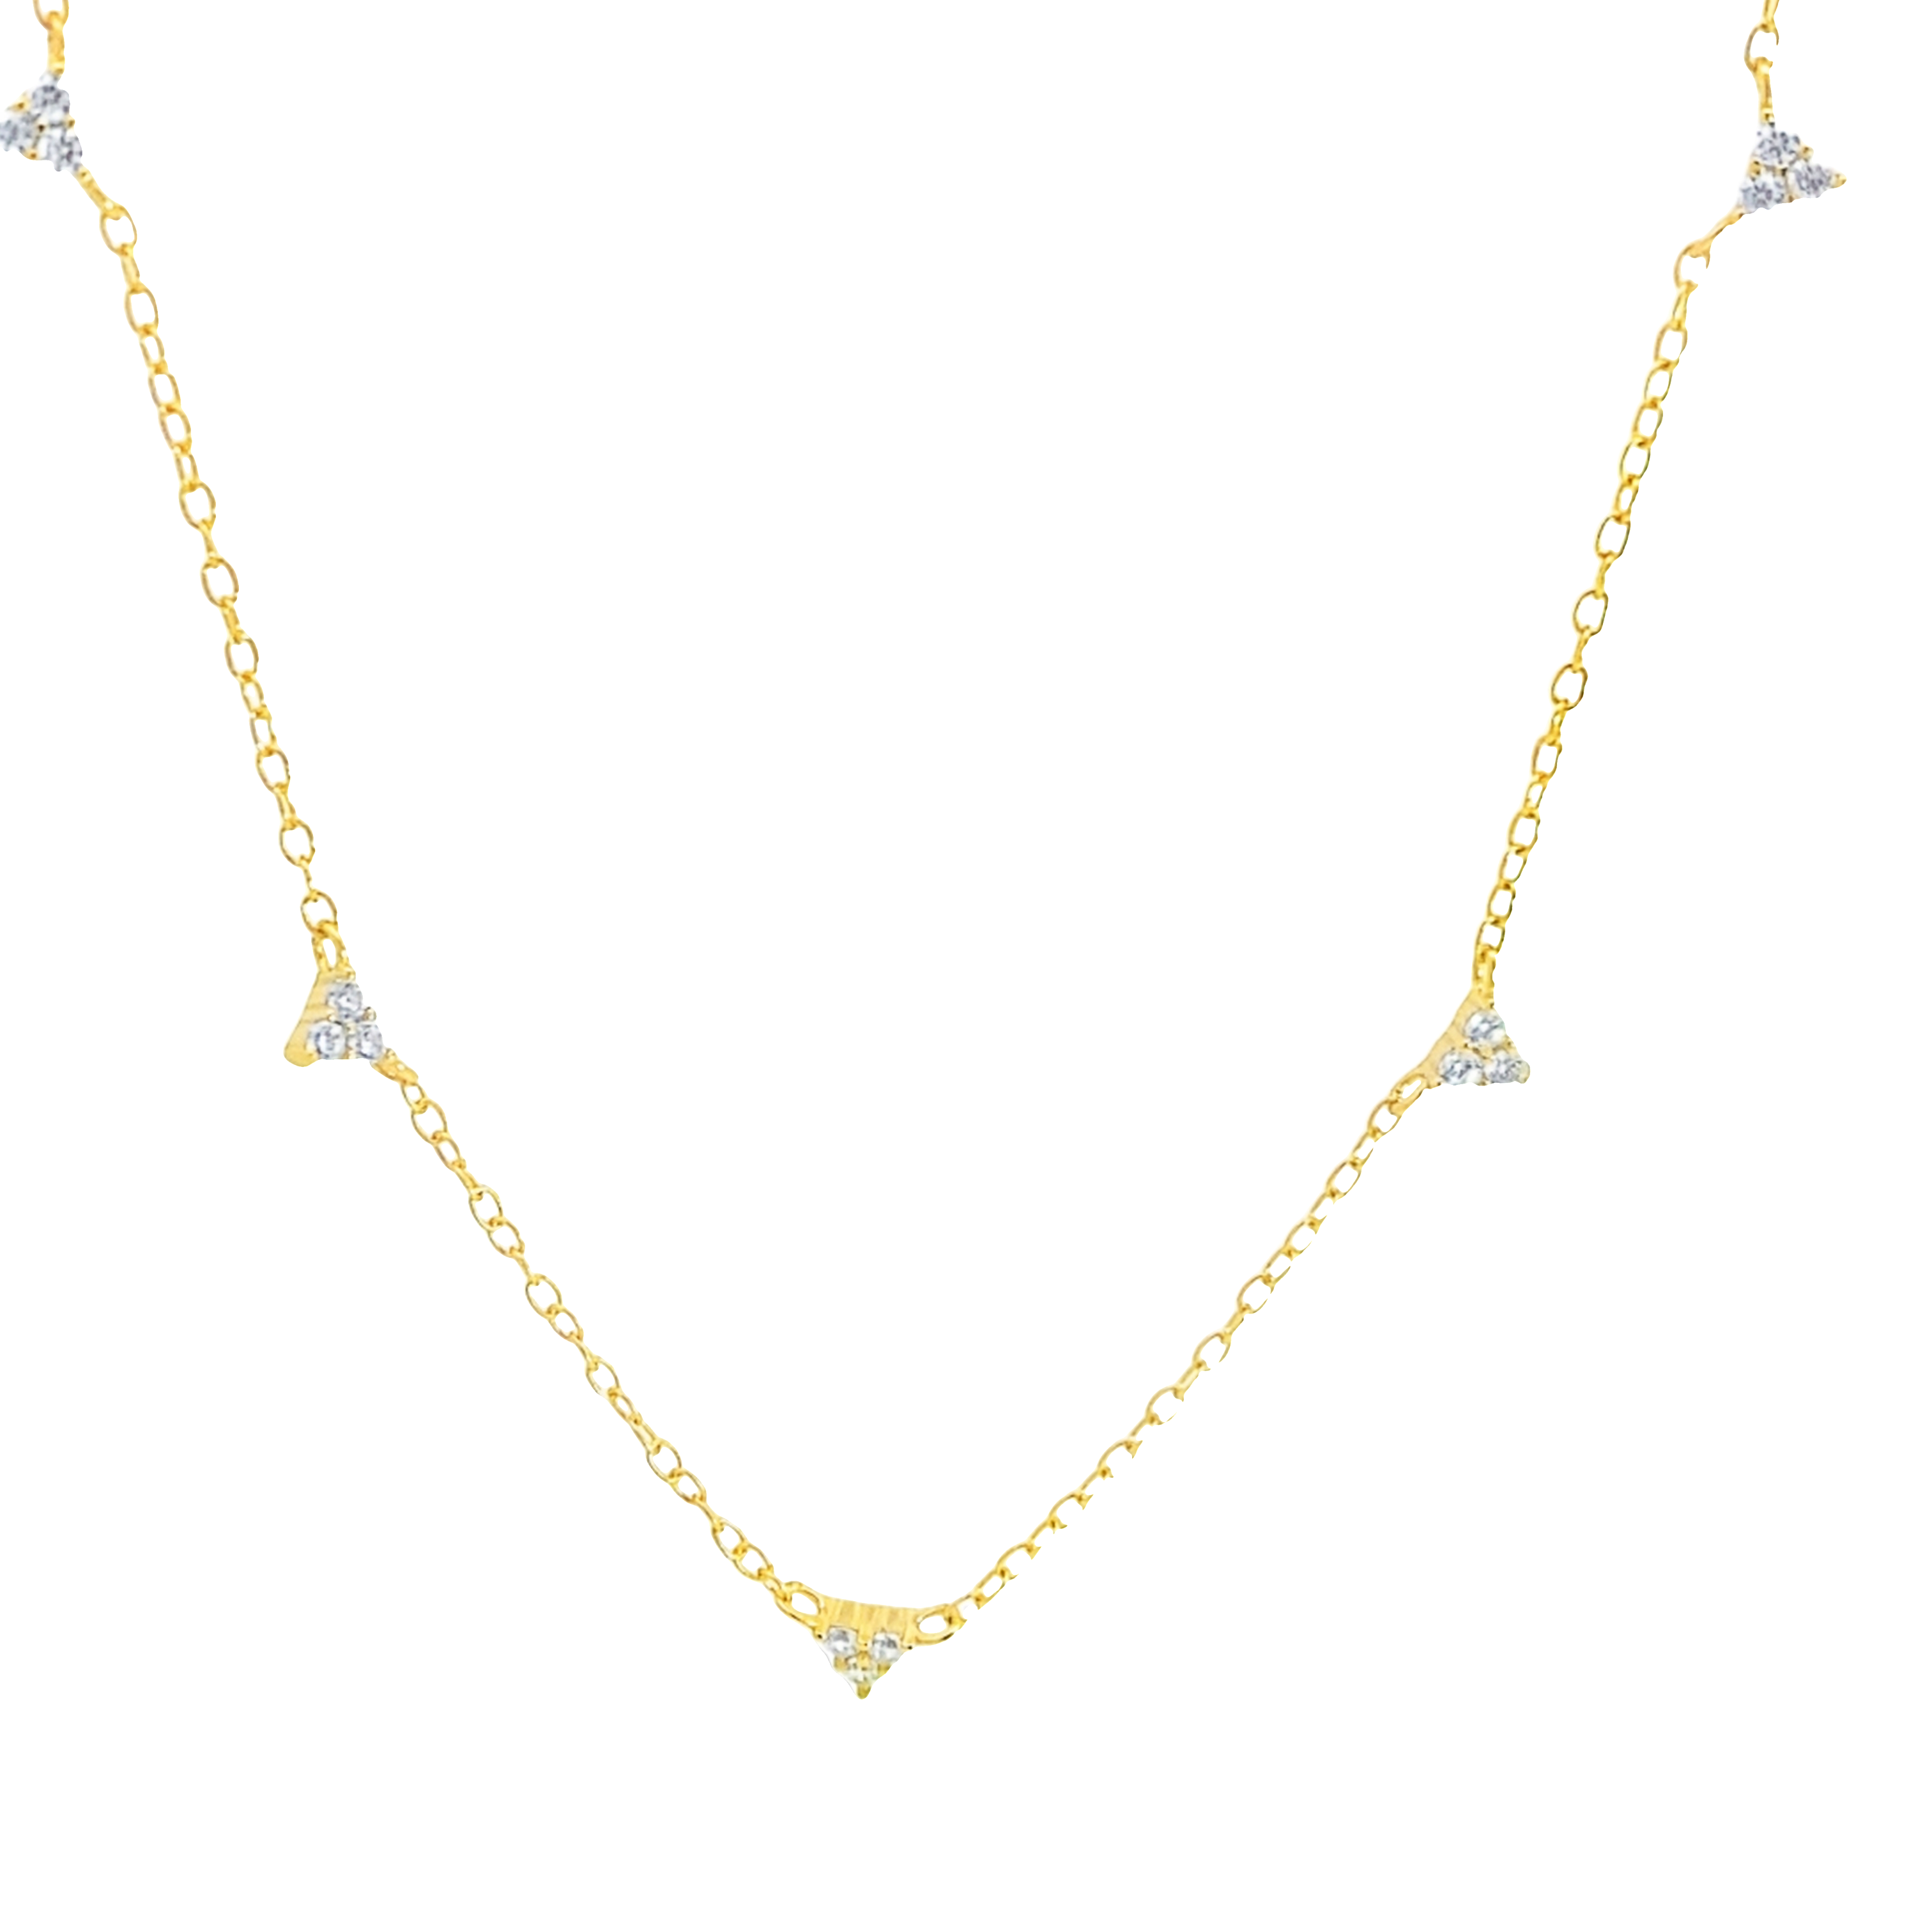 Reagan - Stylish Gold Necklace Crafted with Five Zirconia Stones